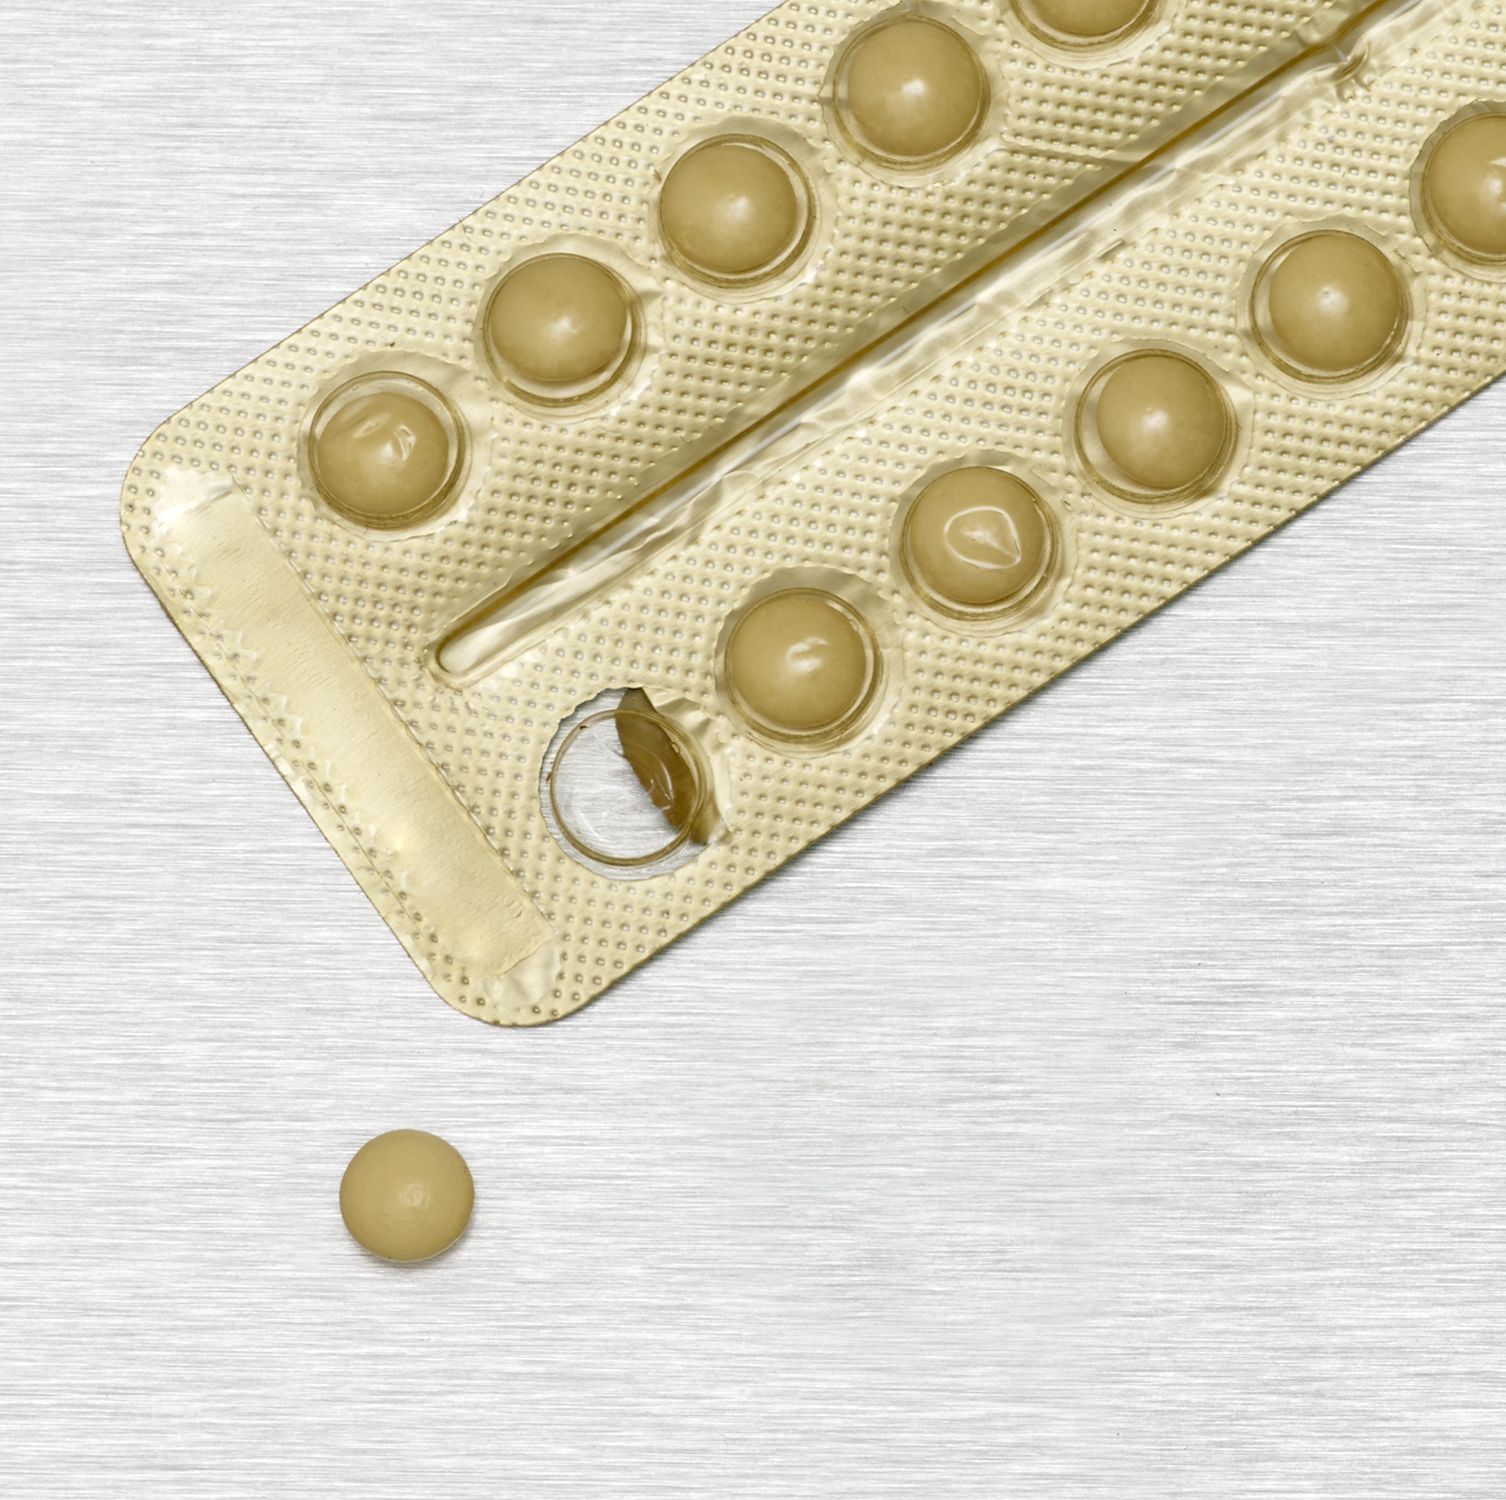 The reason why certain women can get pregnant while taking hormonal contraception